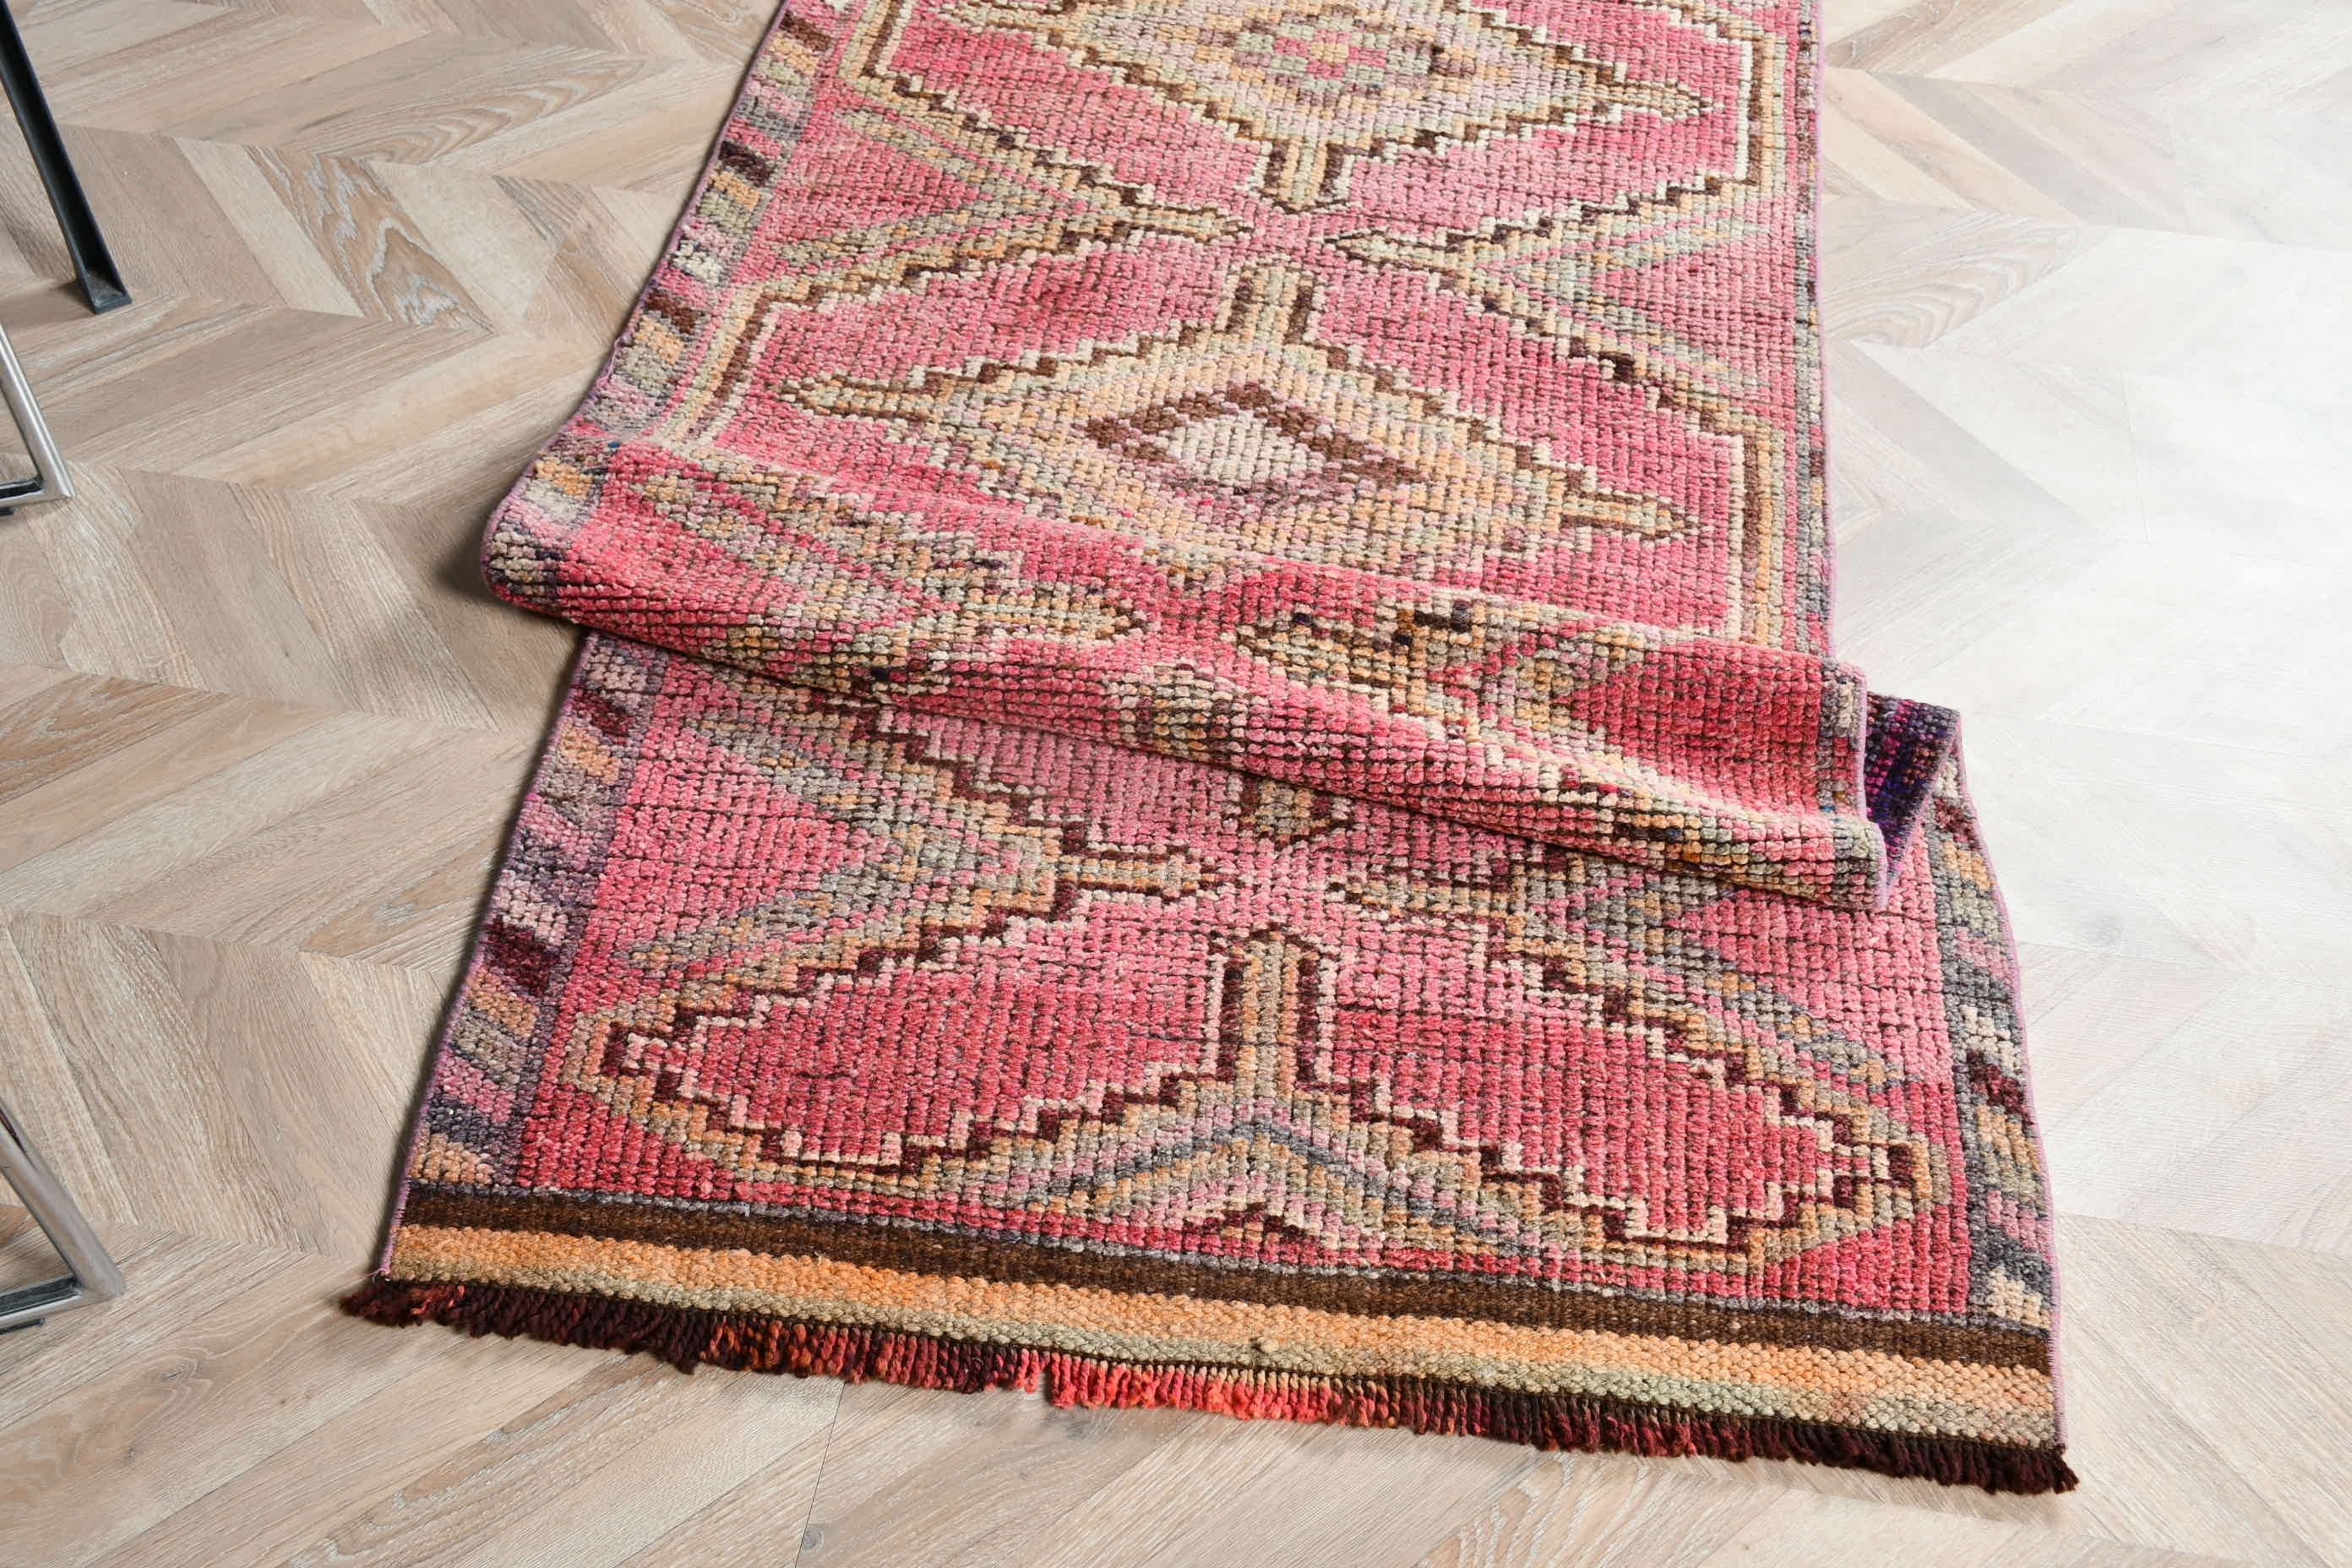 Turkish Rug, 3x10.7 ft Runner Rug, Wool Rugs, Vintage Rug, Pink Oushak Rug, Stair Rug, Rugs for Kitchen, Antique Rugs, Farmhouse Decor Rug